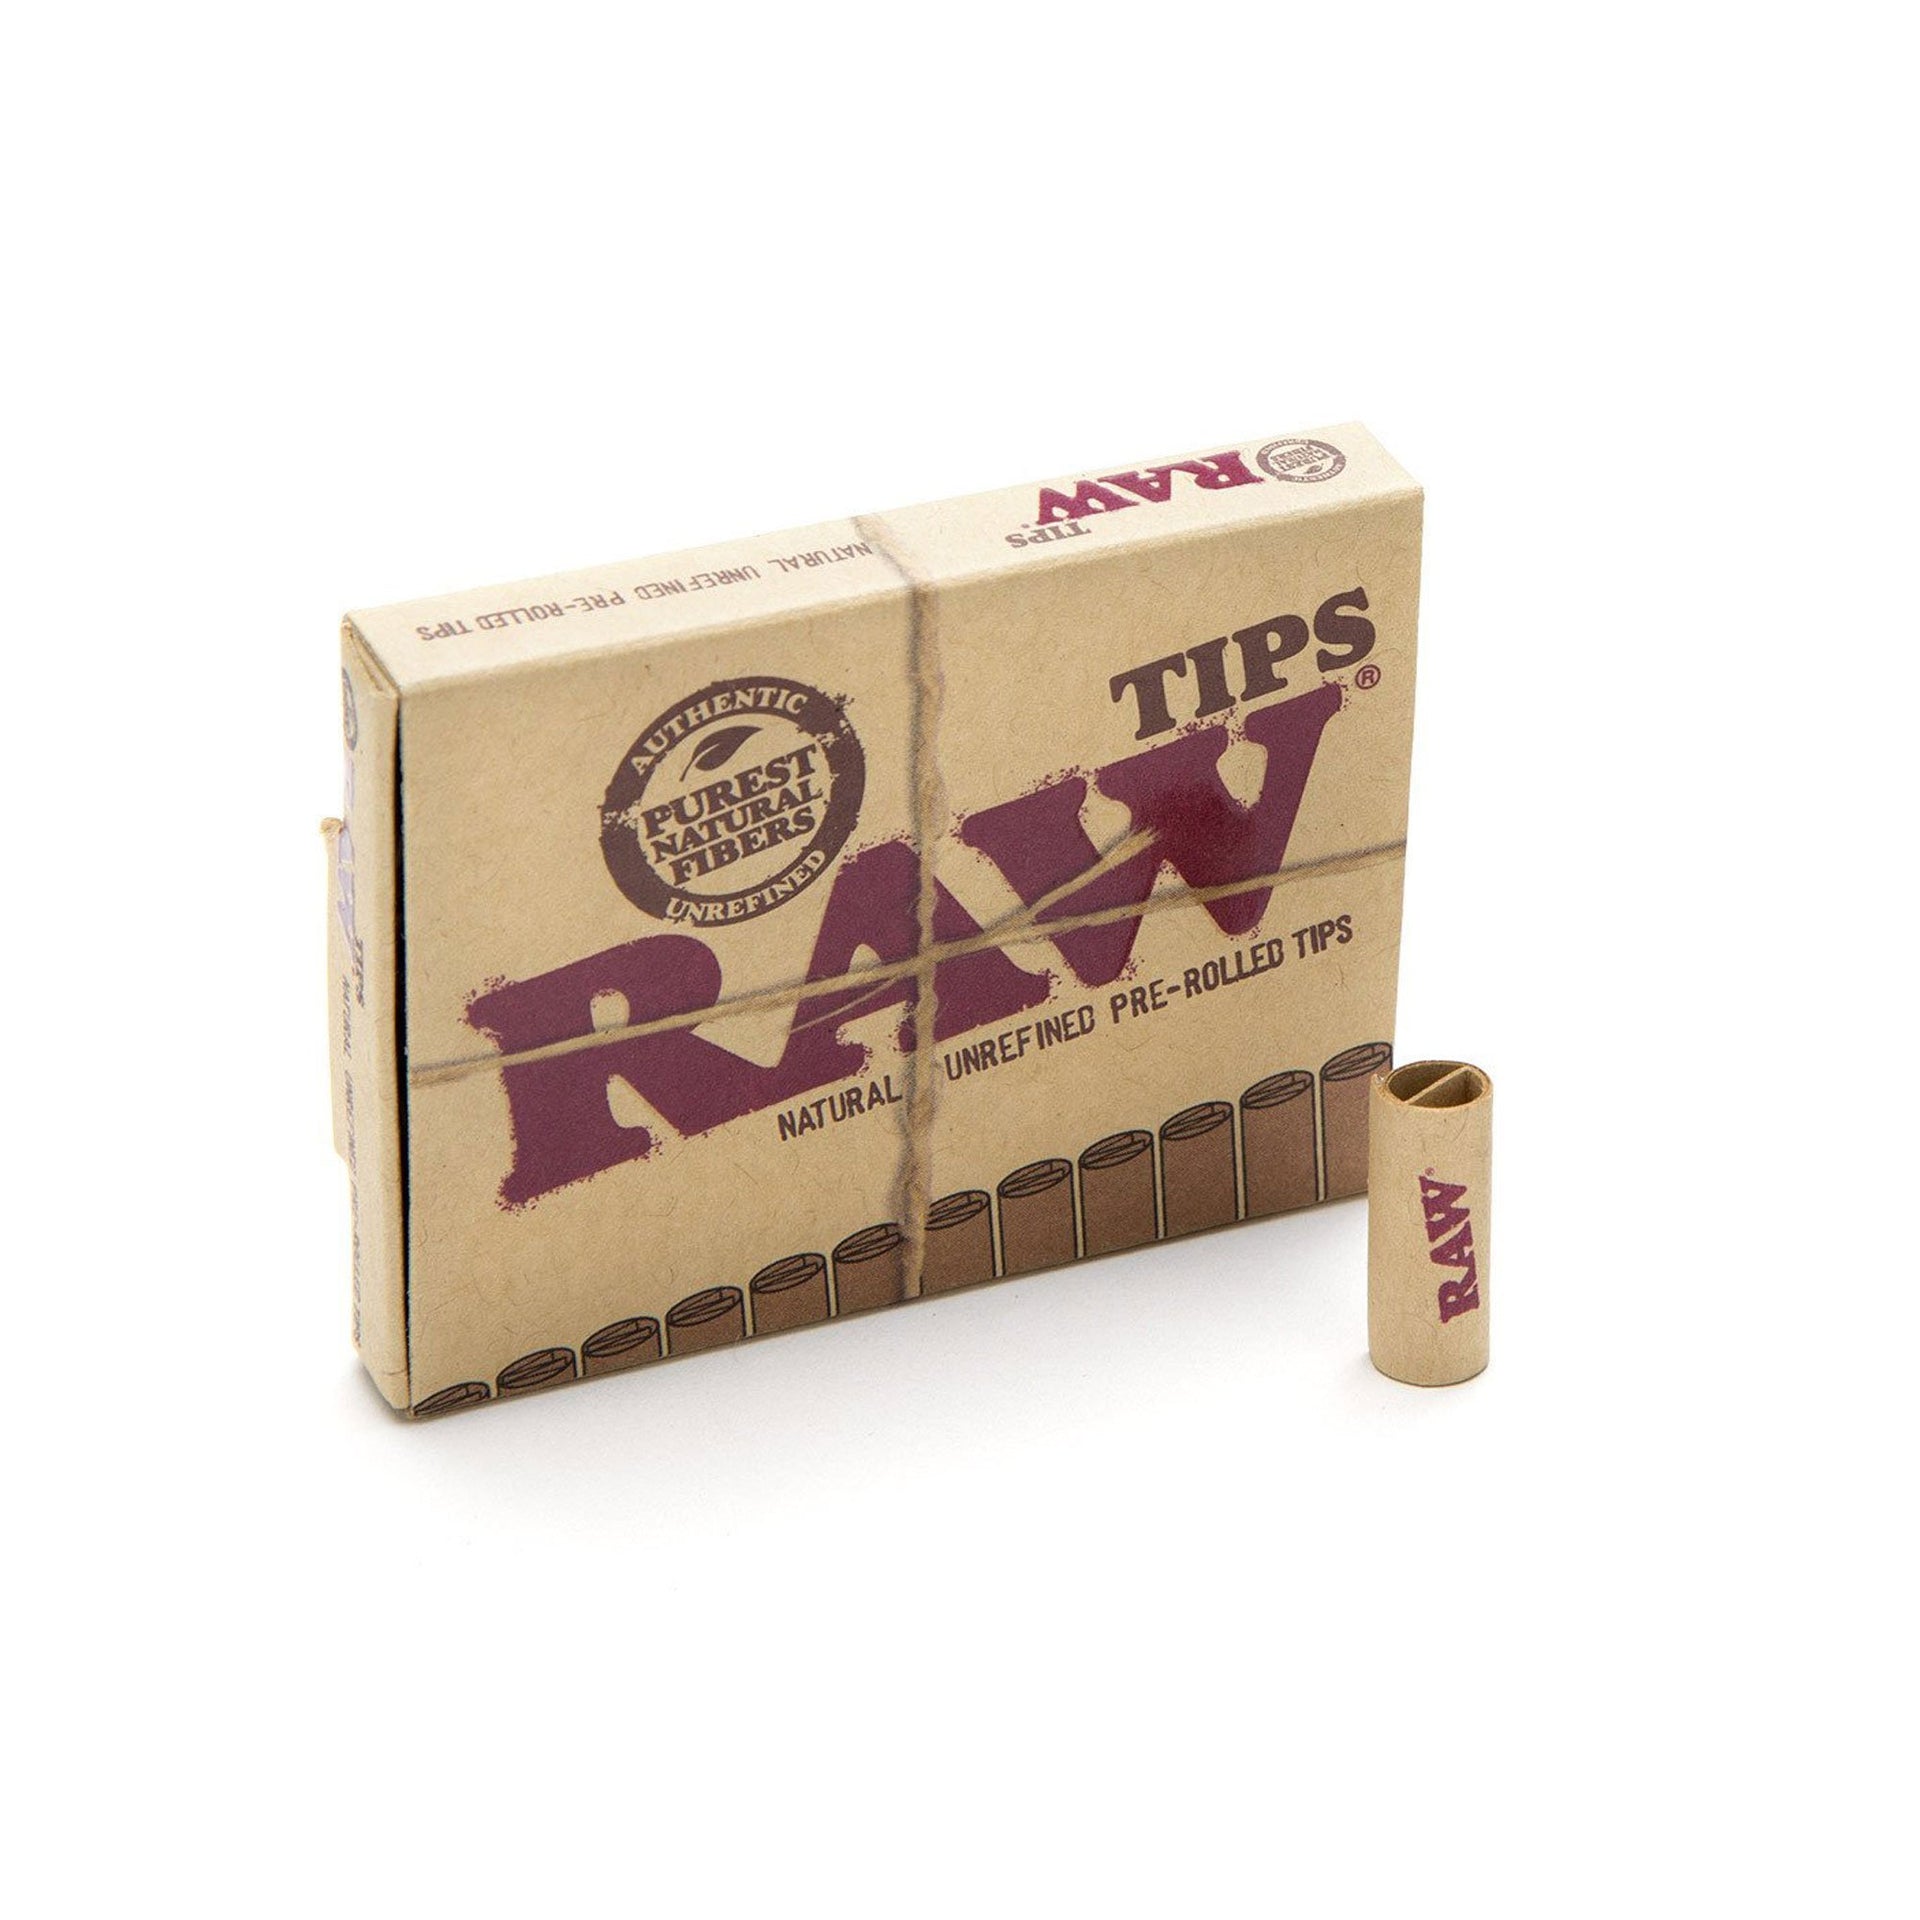  Raw Pre-Rolled Tips - 20 Pack Box (21 Tips Per Pack) Total 420  tips - Quicker and Efficient Rolling : Health & Household